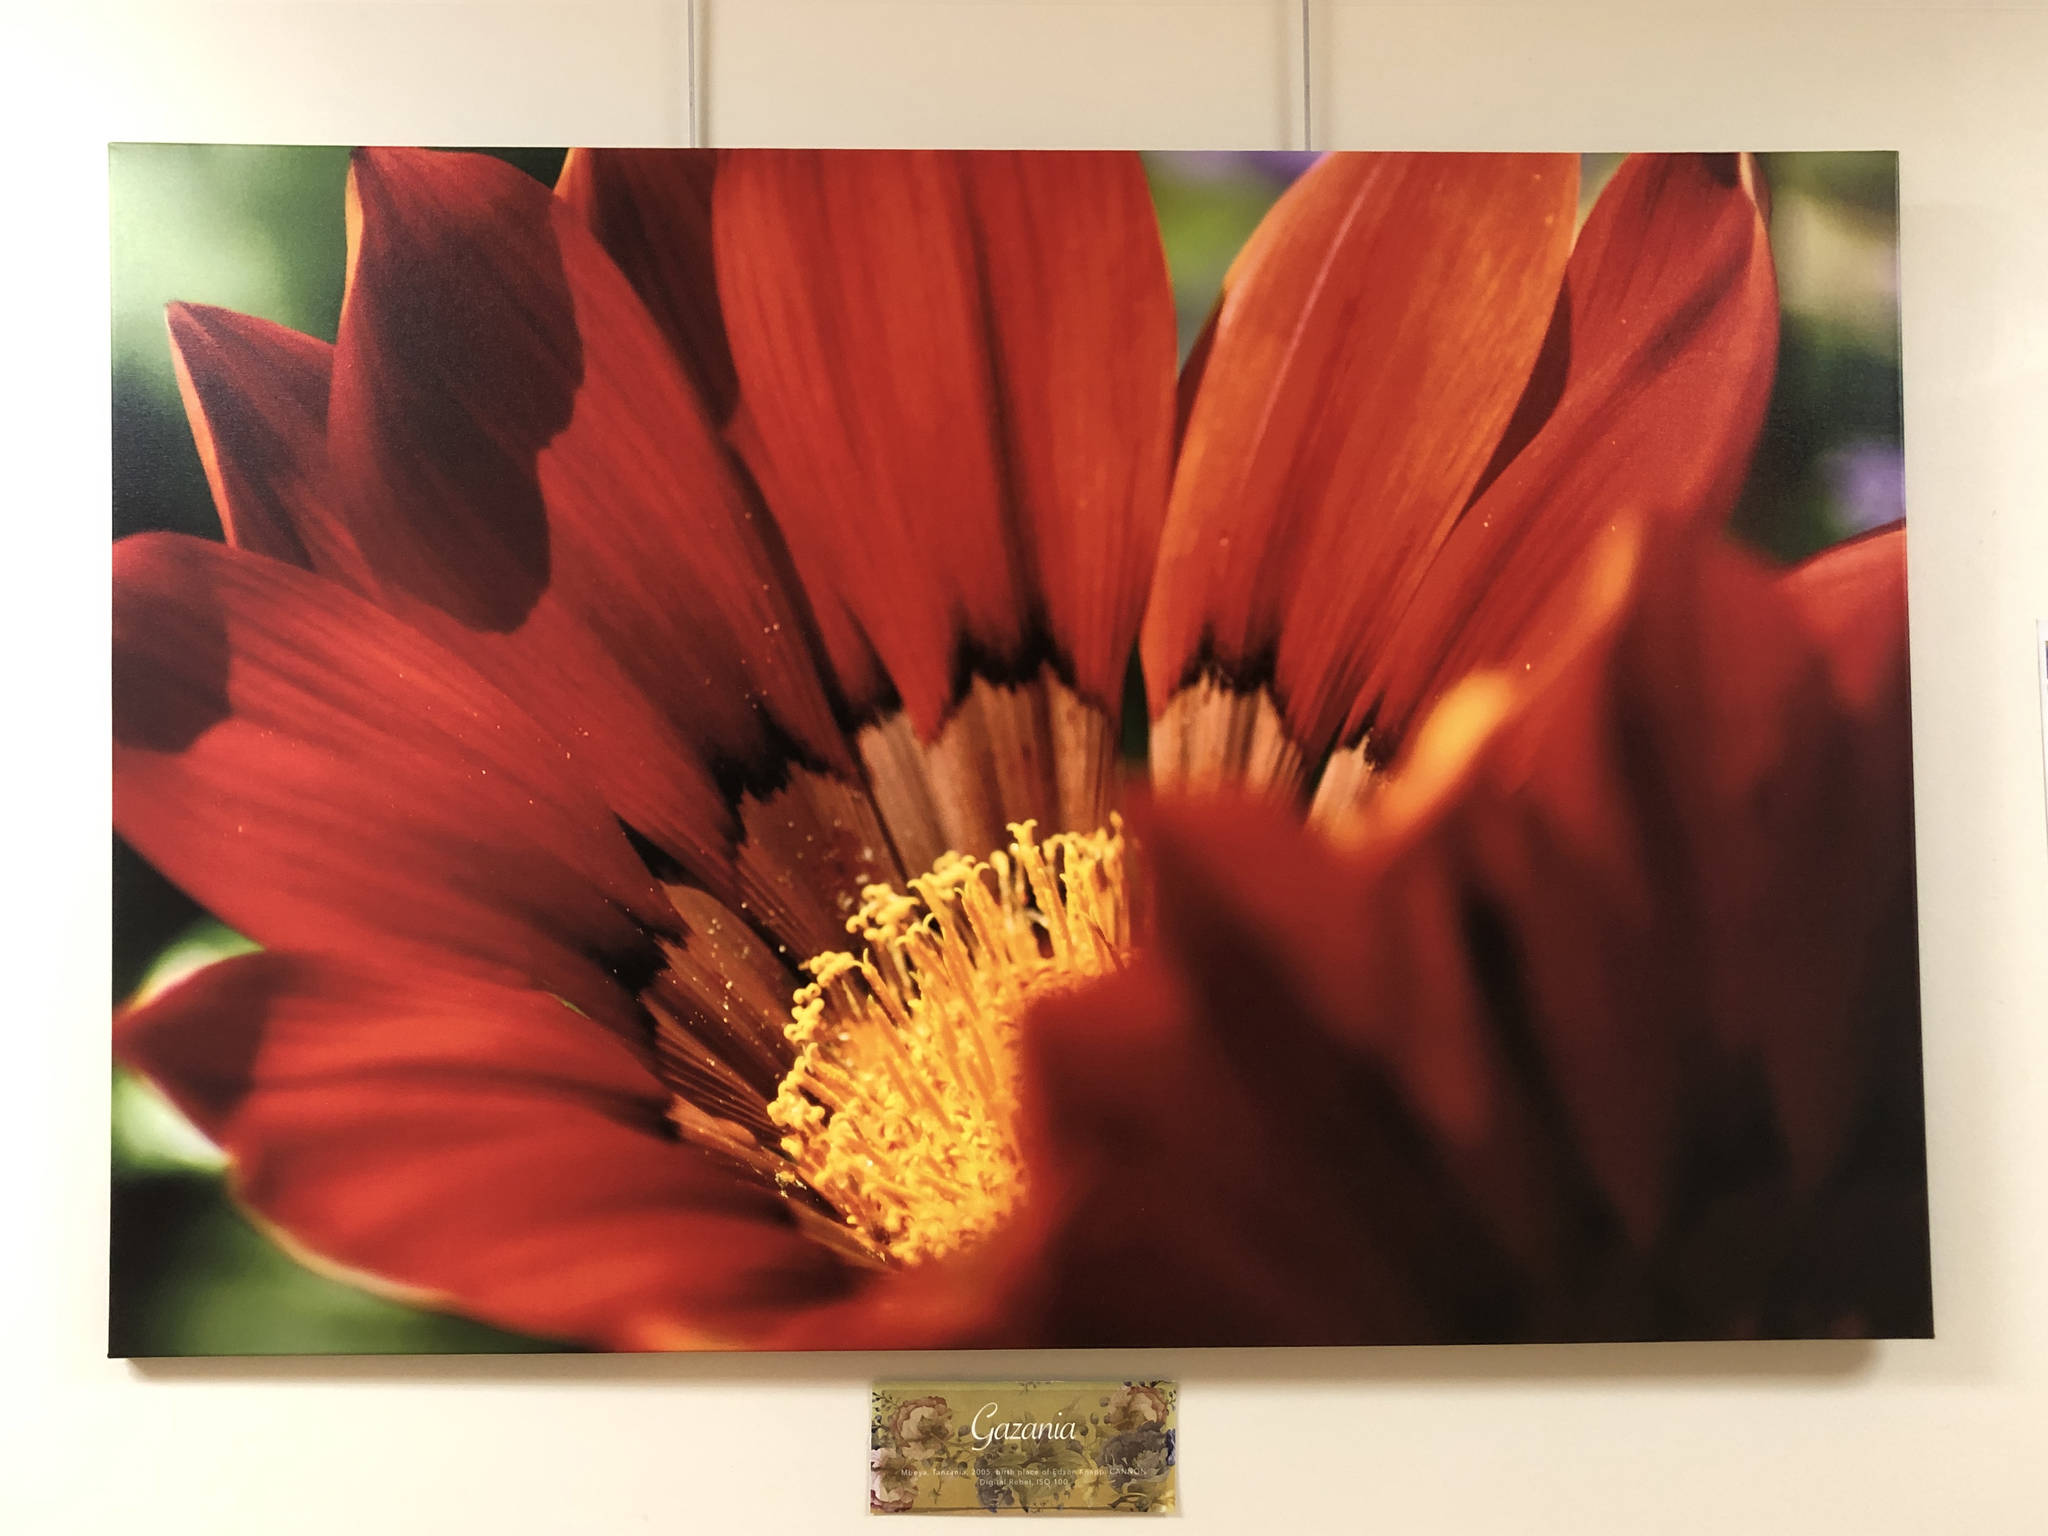 A photograph by Dr. Edson Knapp from “Spring,” a collaborative show with poet Linda Martin showing at South Peninsula Hospital. (Photo provided)